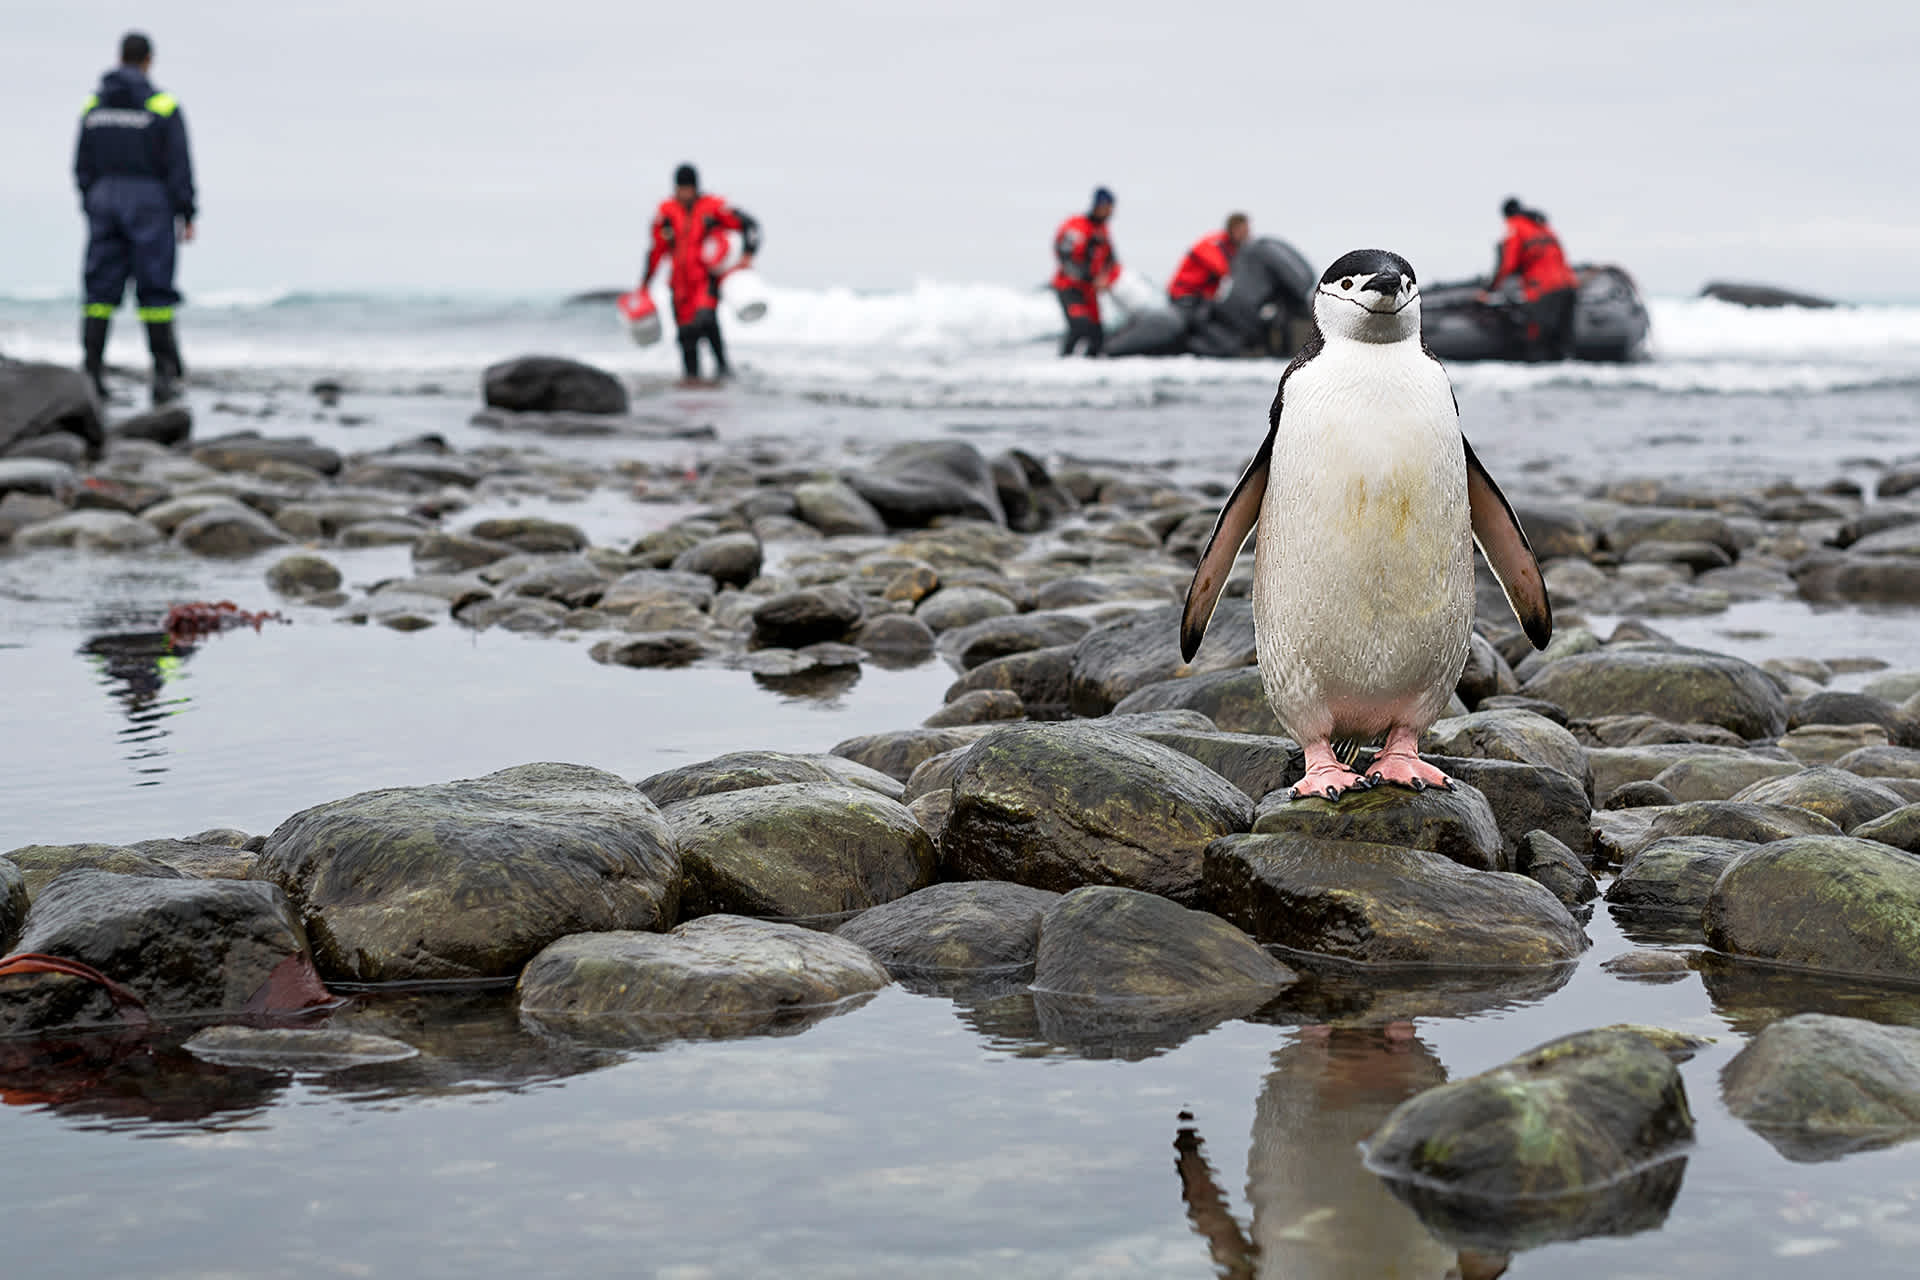 An chinstrap penguin stands on rocks on an island in the Antarctic. Scientists work with equipment in the background.